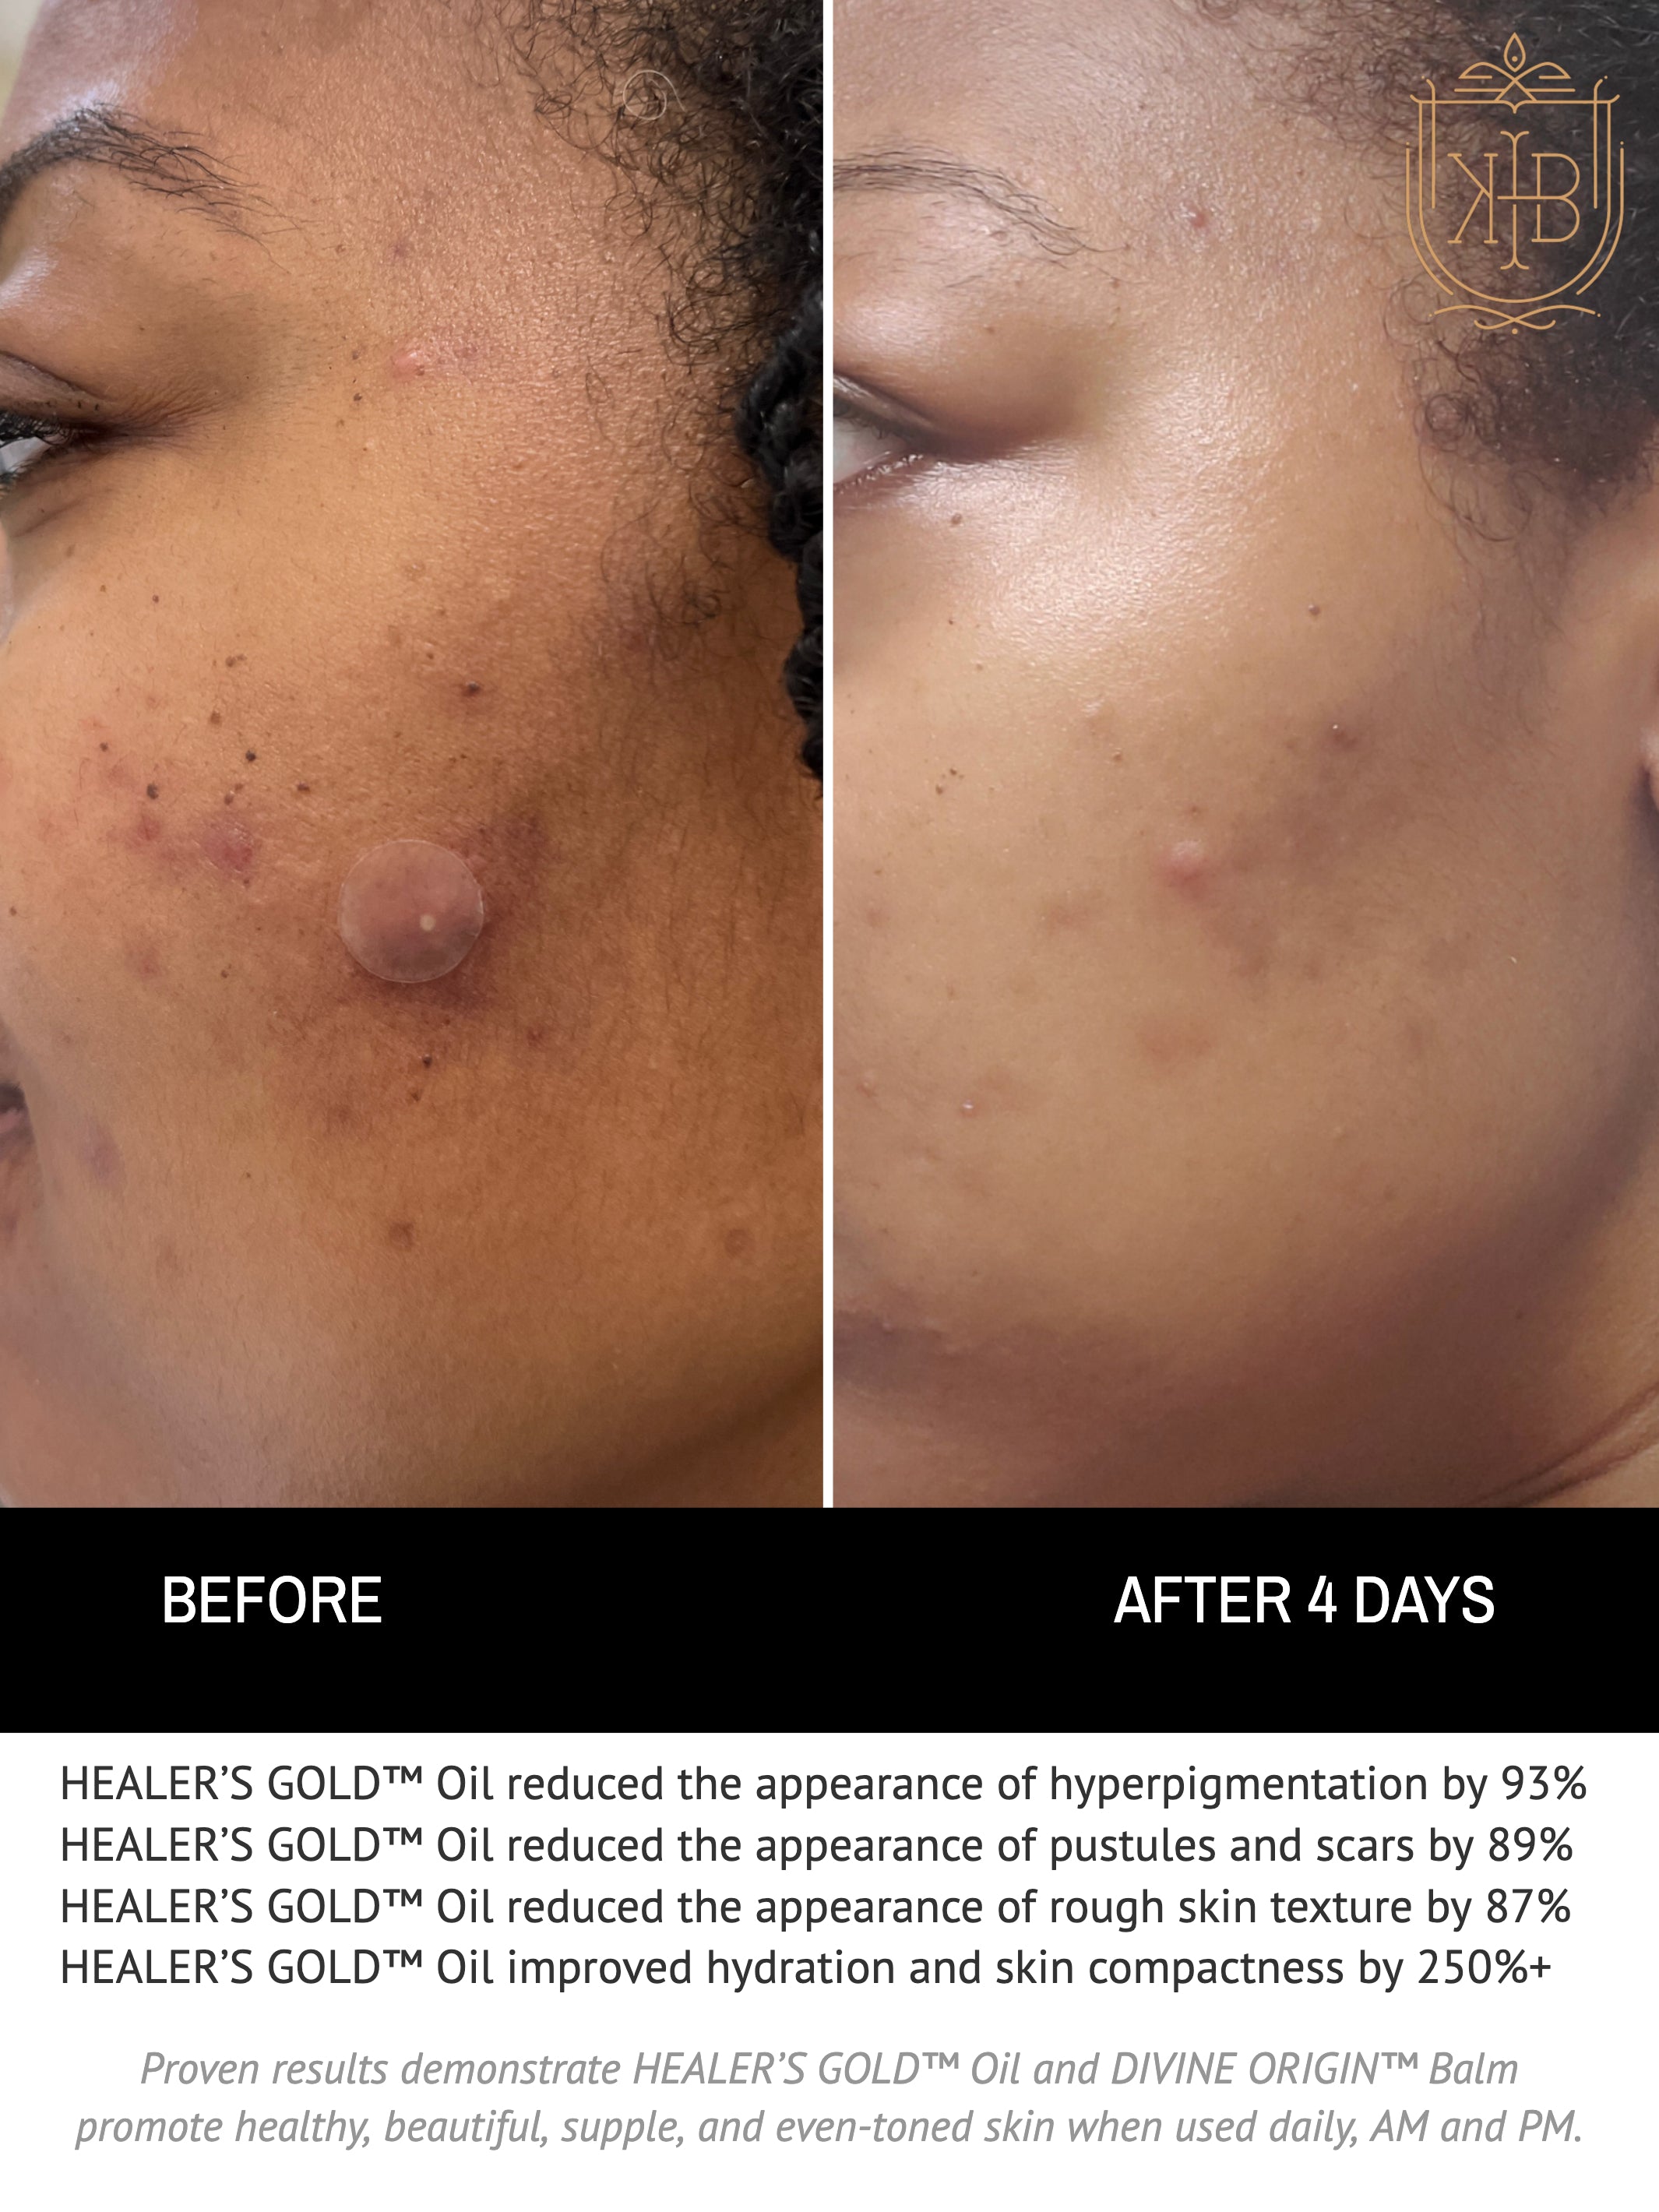 HEALER’S GOLD™ Oil reduced the appearance of hyperpigmentation by 93%, educed the appearance of pustules and scars by 89%, improve rough skin texture by 87%, and improved hydration, elasticity, and skin compactness by 250%+. Proven results demonstrate HEALER’S GOLD™ Oil and DIVINE ORIGIN™ Balm promote healthy, beautiful, supple, and even-toned skin when used daily, AM and PM.